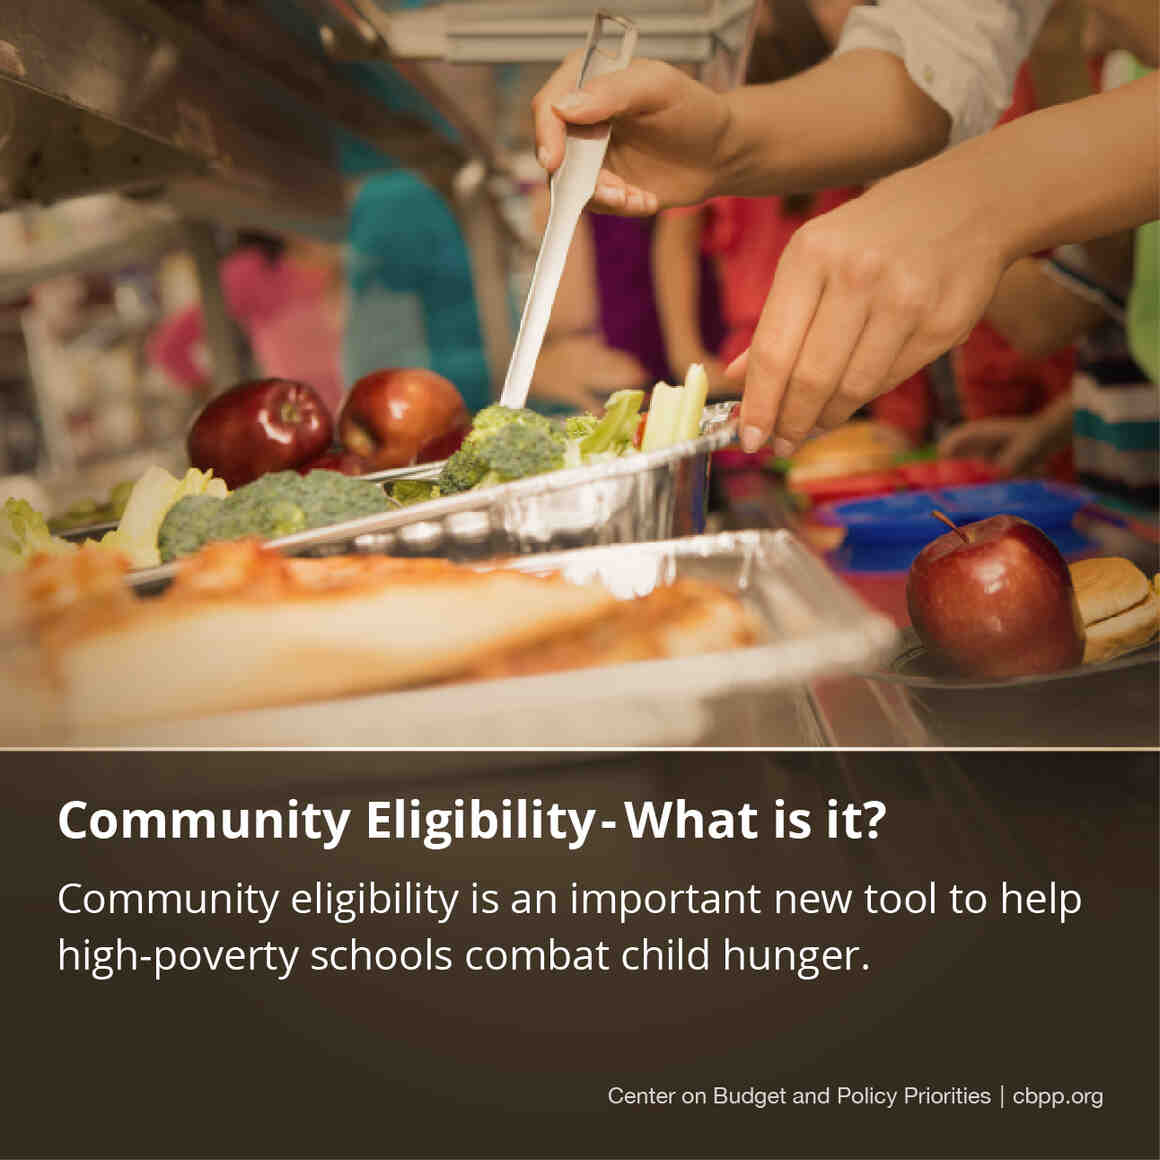 Photographic: Community Eligibility - What is it?